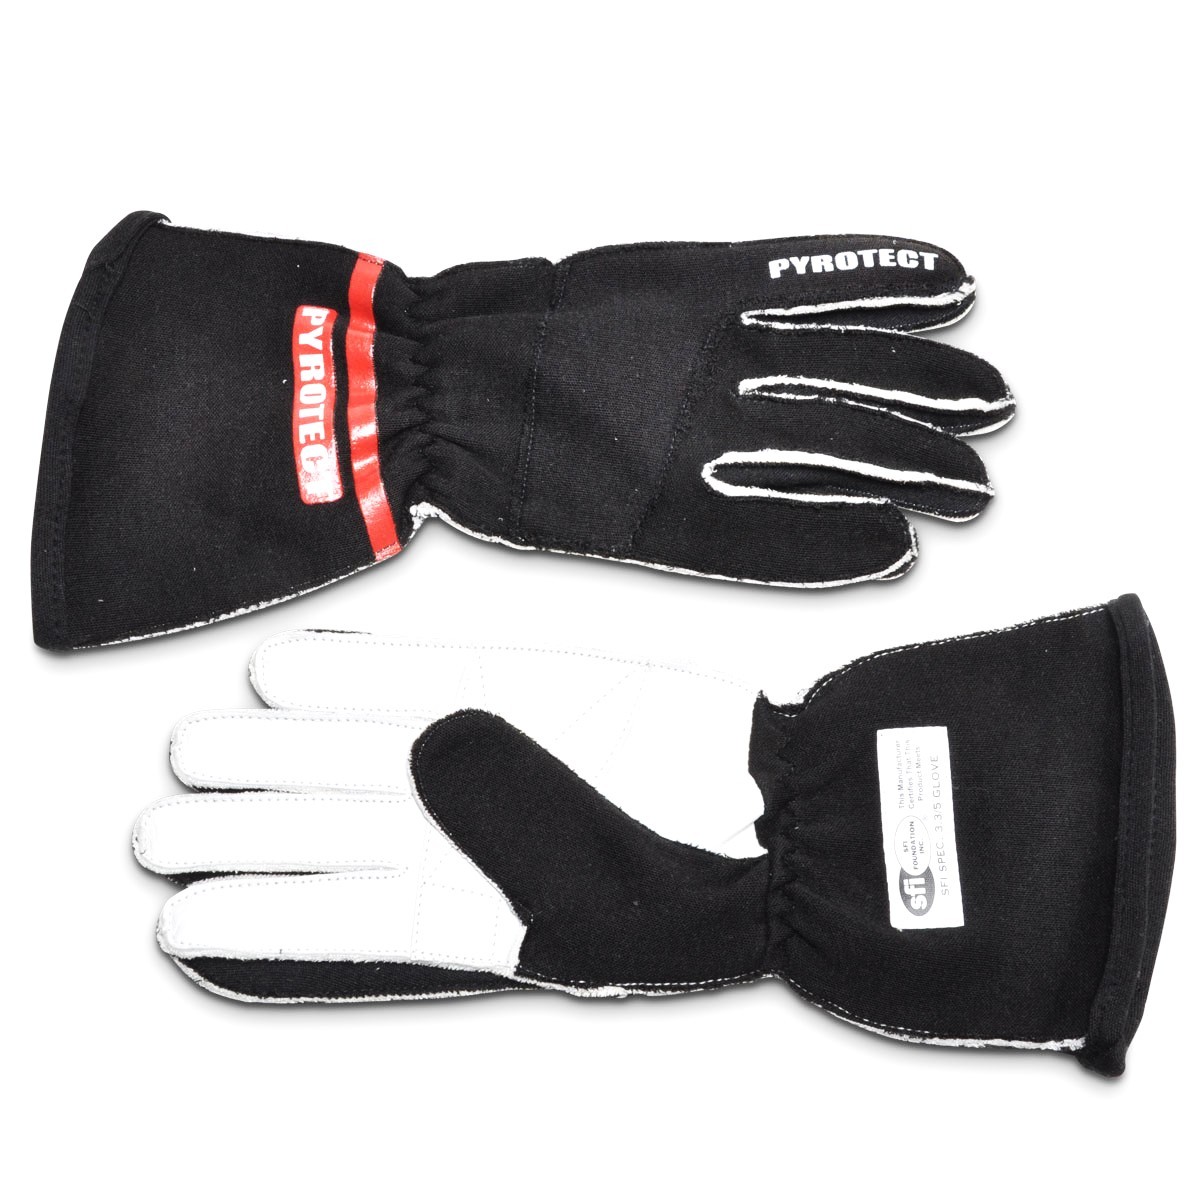 Pyrotect Safety GP200320 Gloves, Driving, SFI 3.3/5, Double Layer, Pro Reverse Stitch, Nomex, Black, Medium, Pair